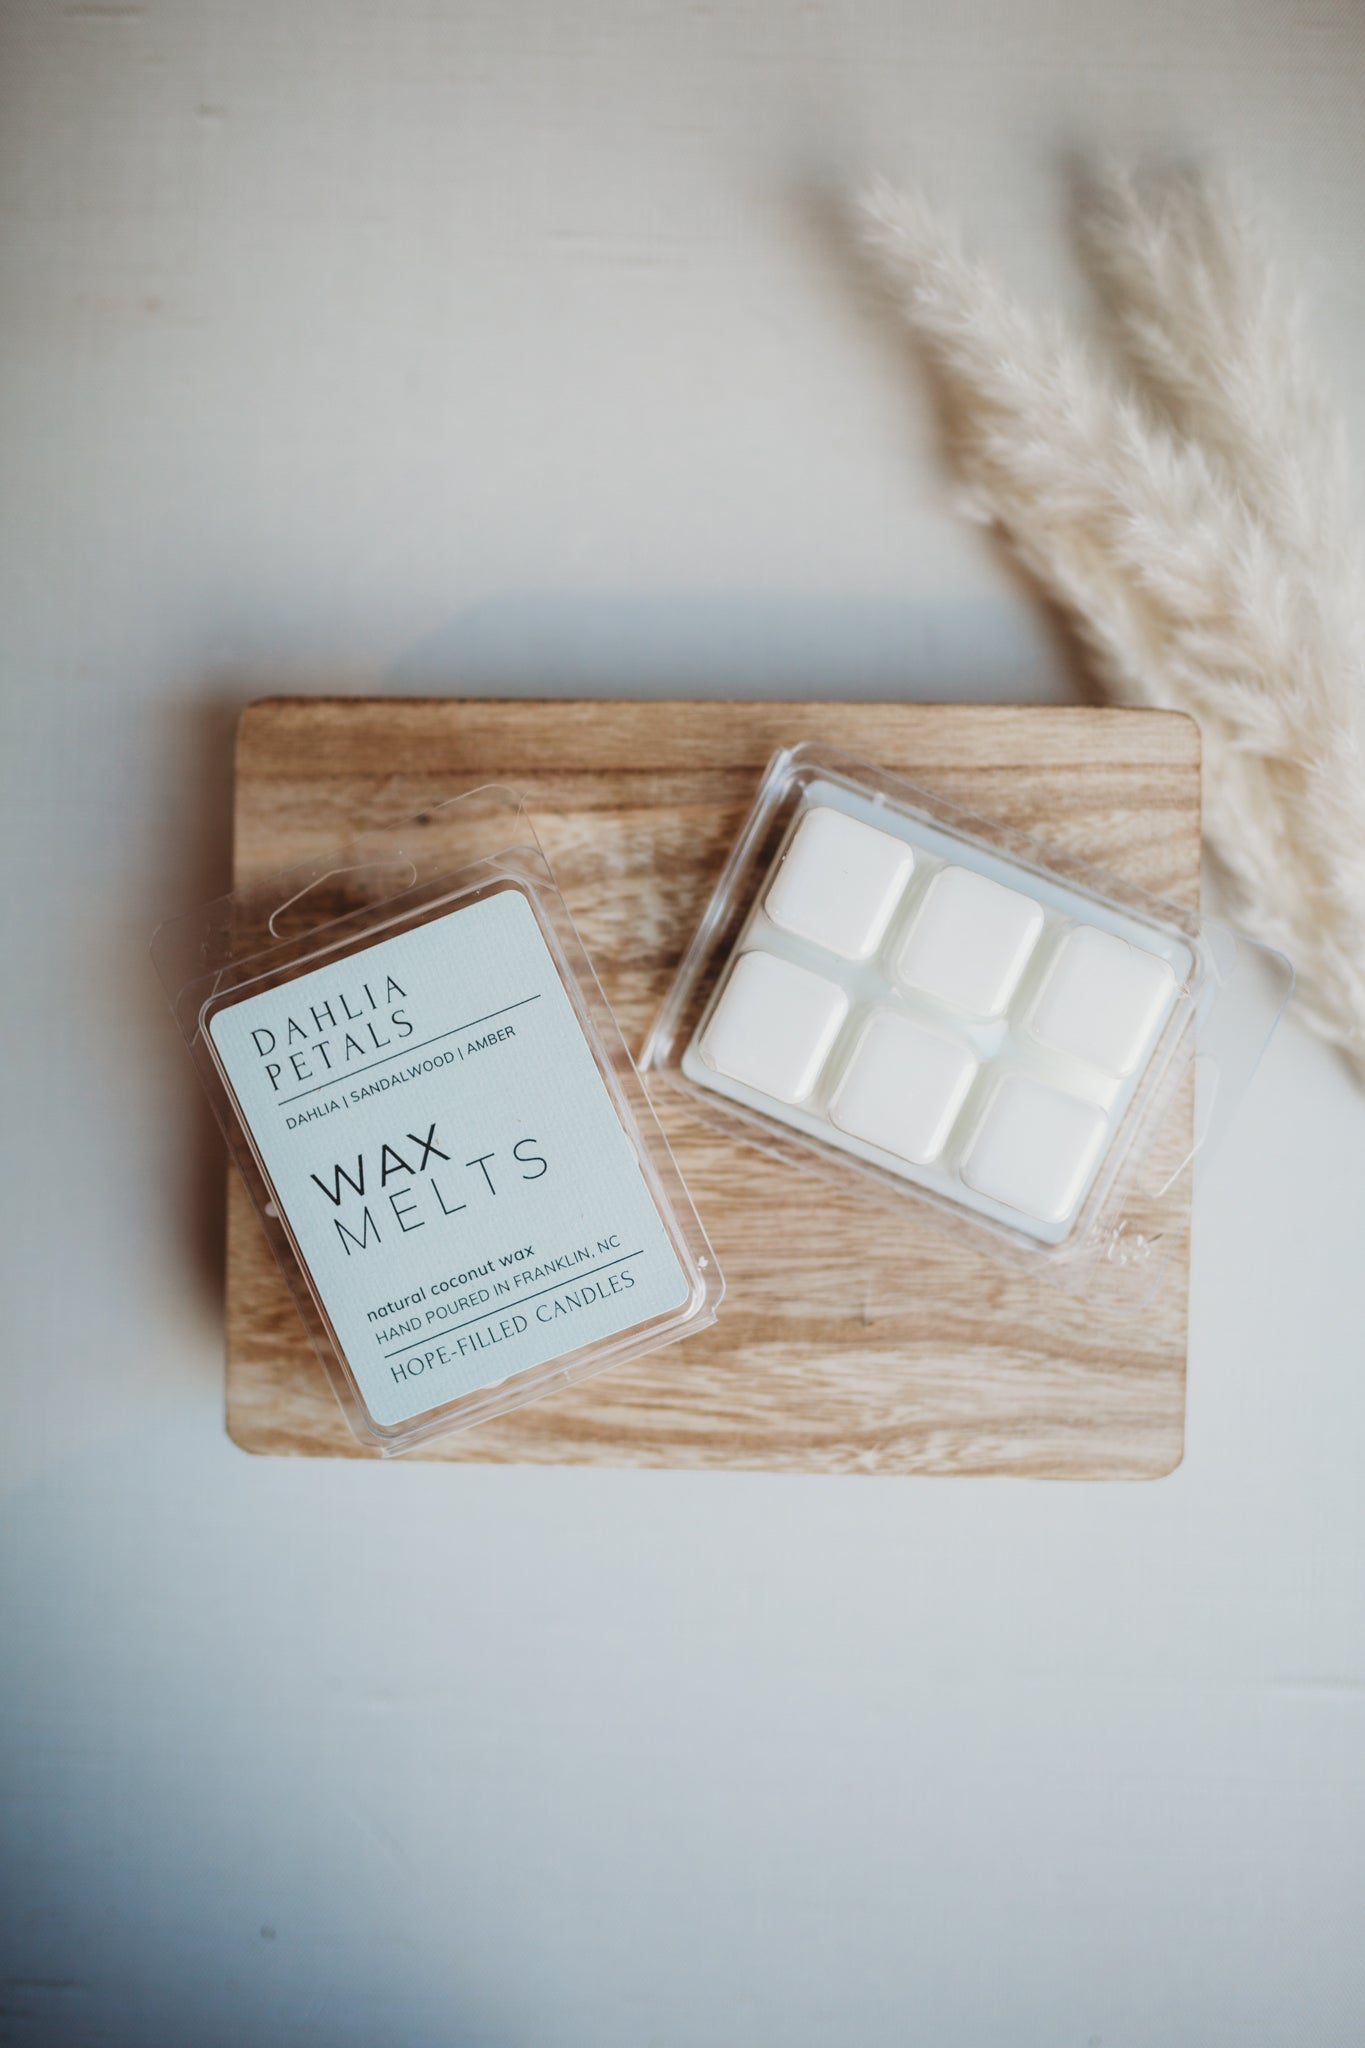 Wax Melts – Hope-filled Candles